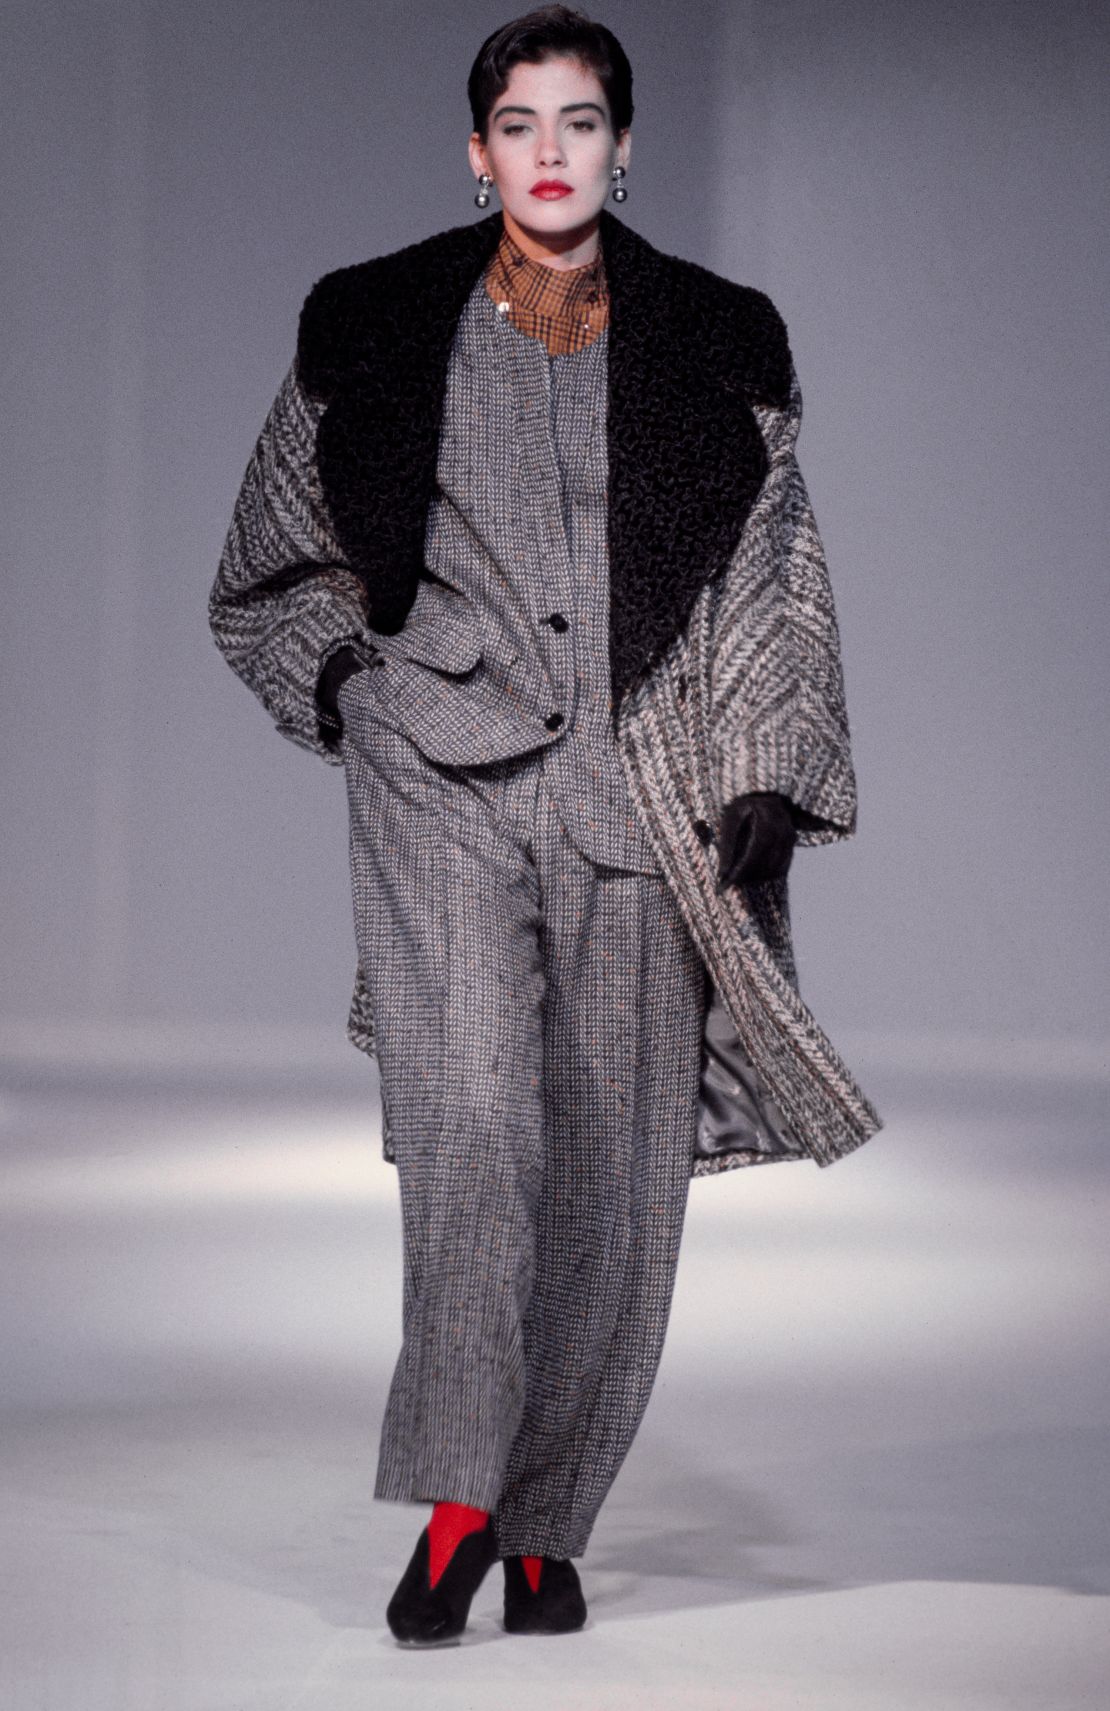 A model in Nico Cerruti's show, Fall-Winter 1985/86 collection in Paris in March 1985, France.